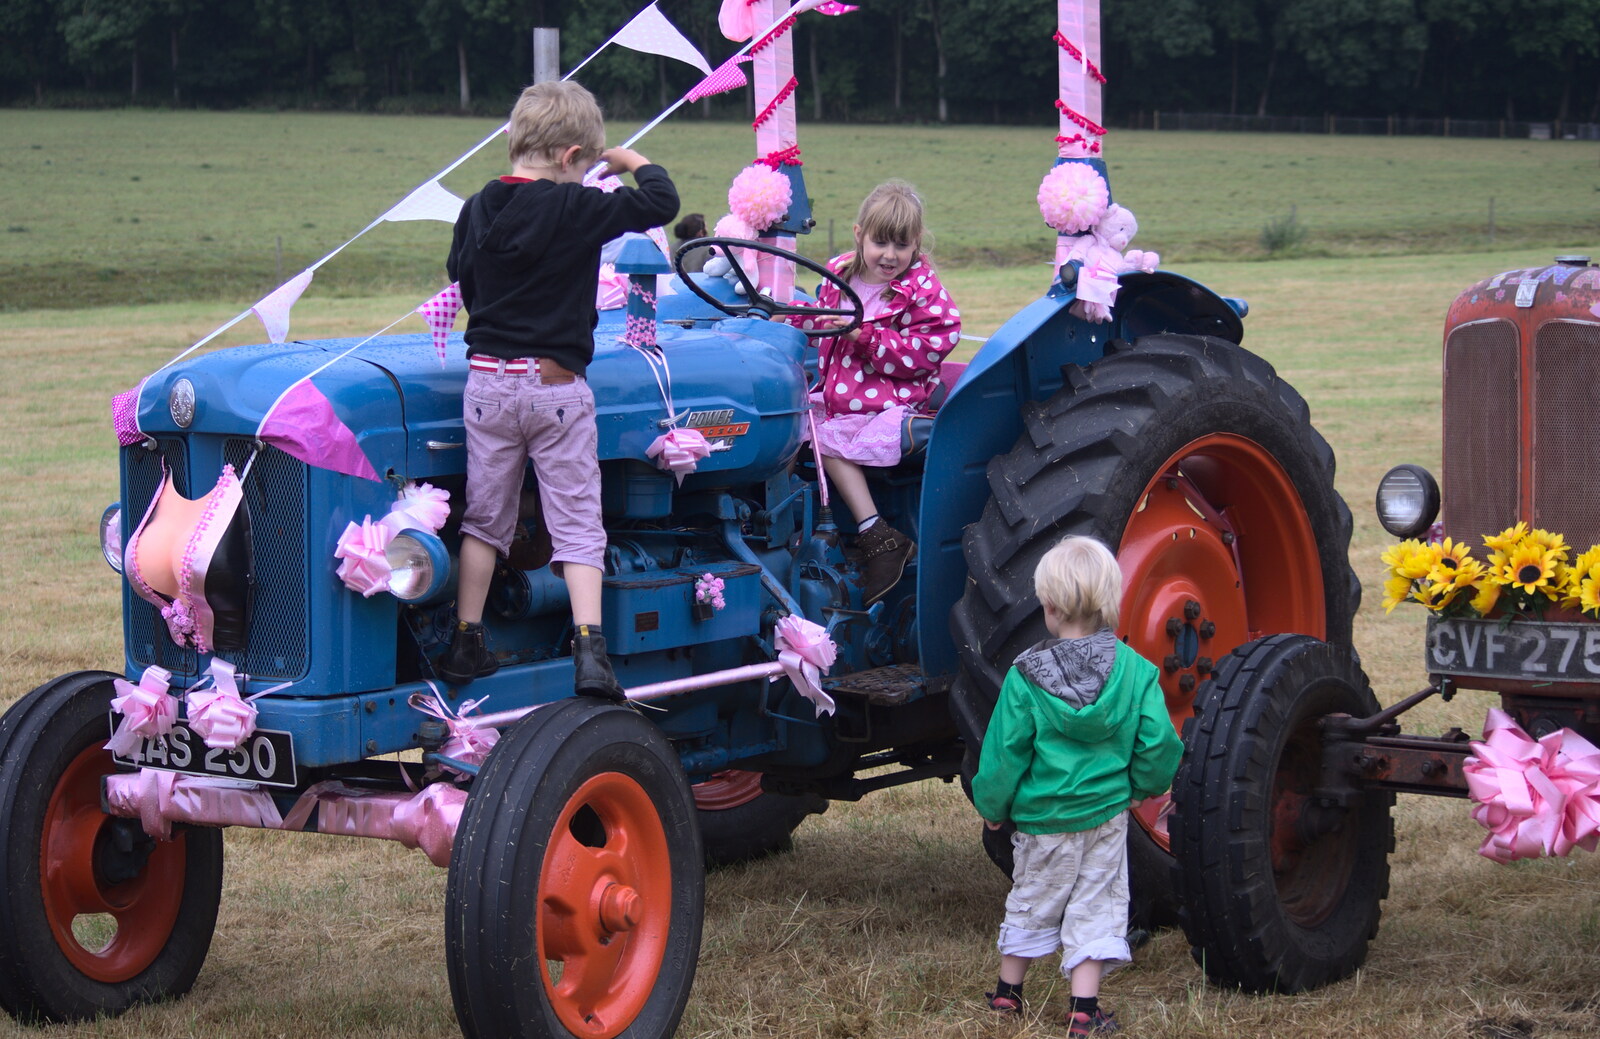 The children climb all over the tractors from The Pink Ladies Tractor Run, Harleston and Gawdy Park, Norfolk - 5th July 2015